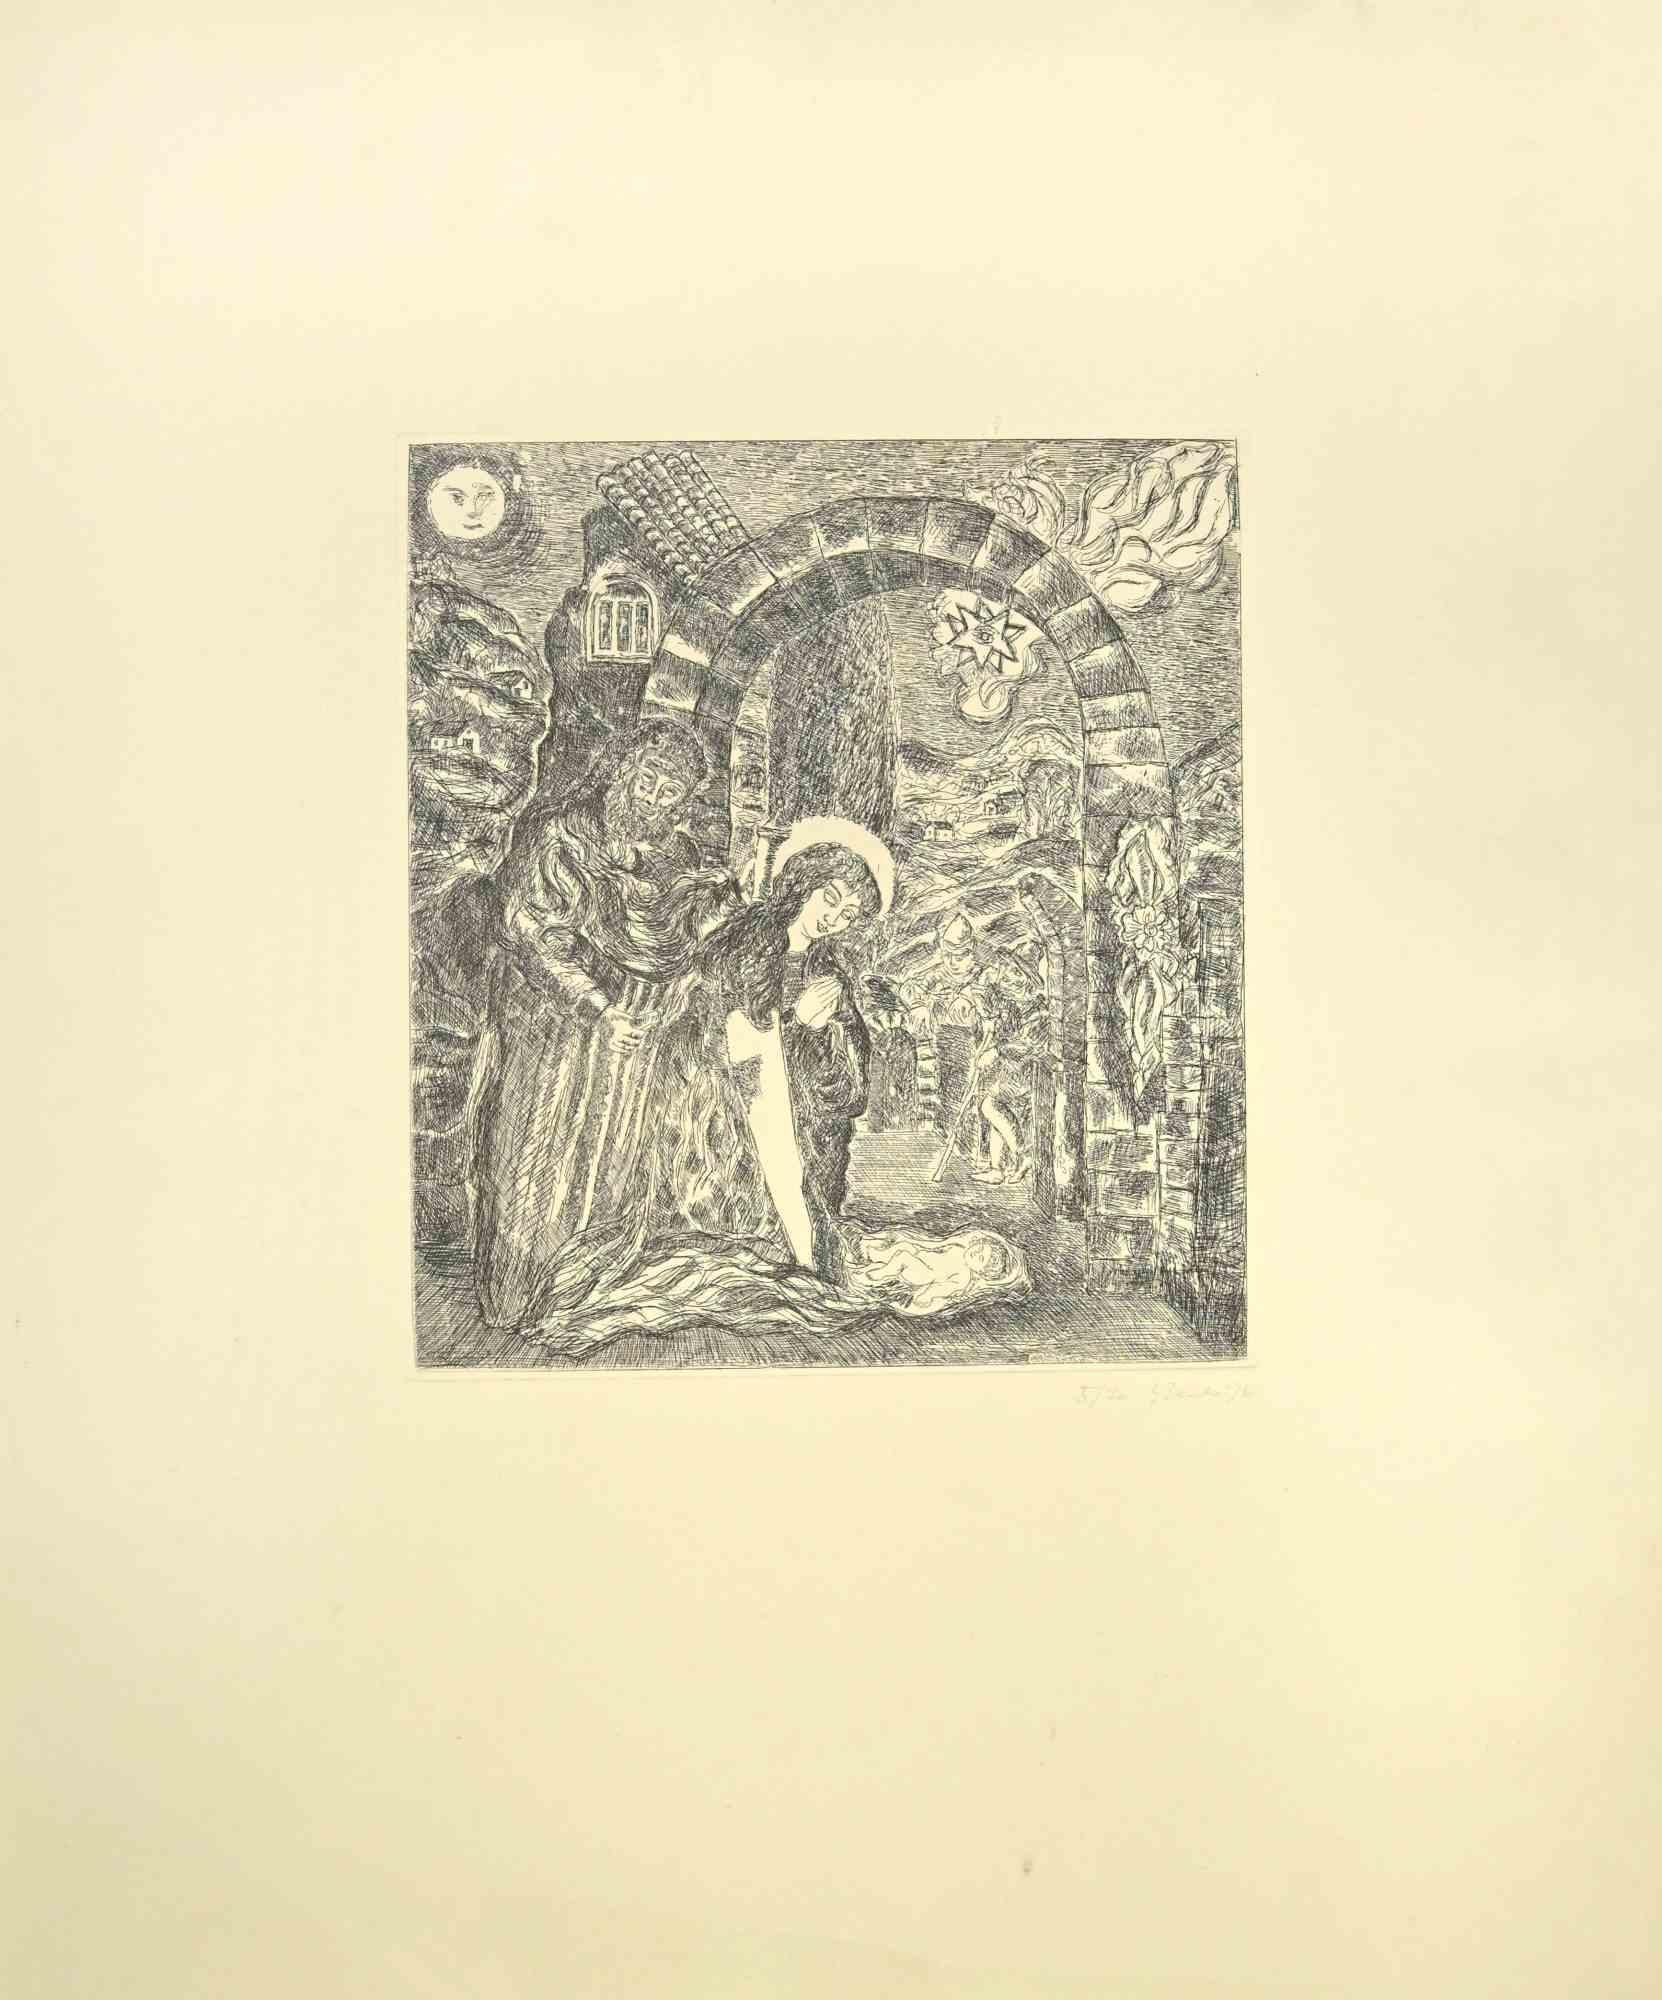 The Cave of Bethlehem is an etching on paper realized by  Gian Paolo Berto  in 1976.

Hand-signed and numbered, edition of 20 prints.

Good conditions with slight folding and foxing.

The artwork is depicted skillfully through confident strokes with